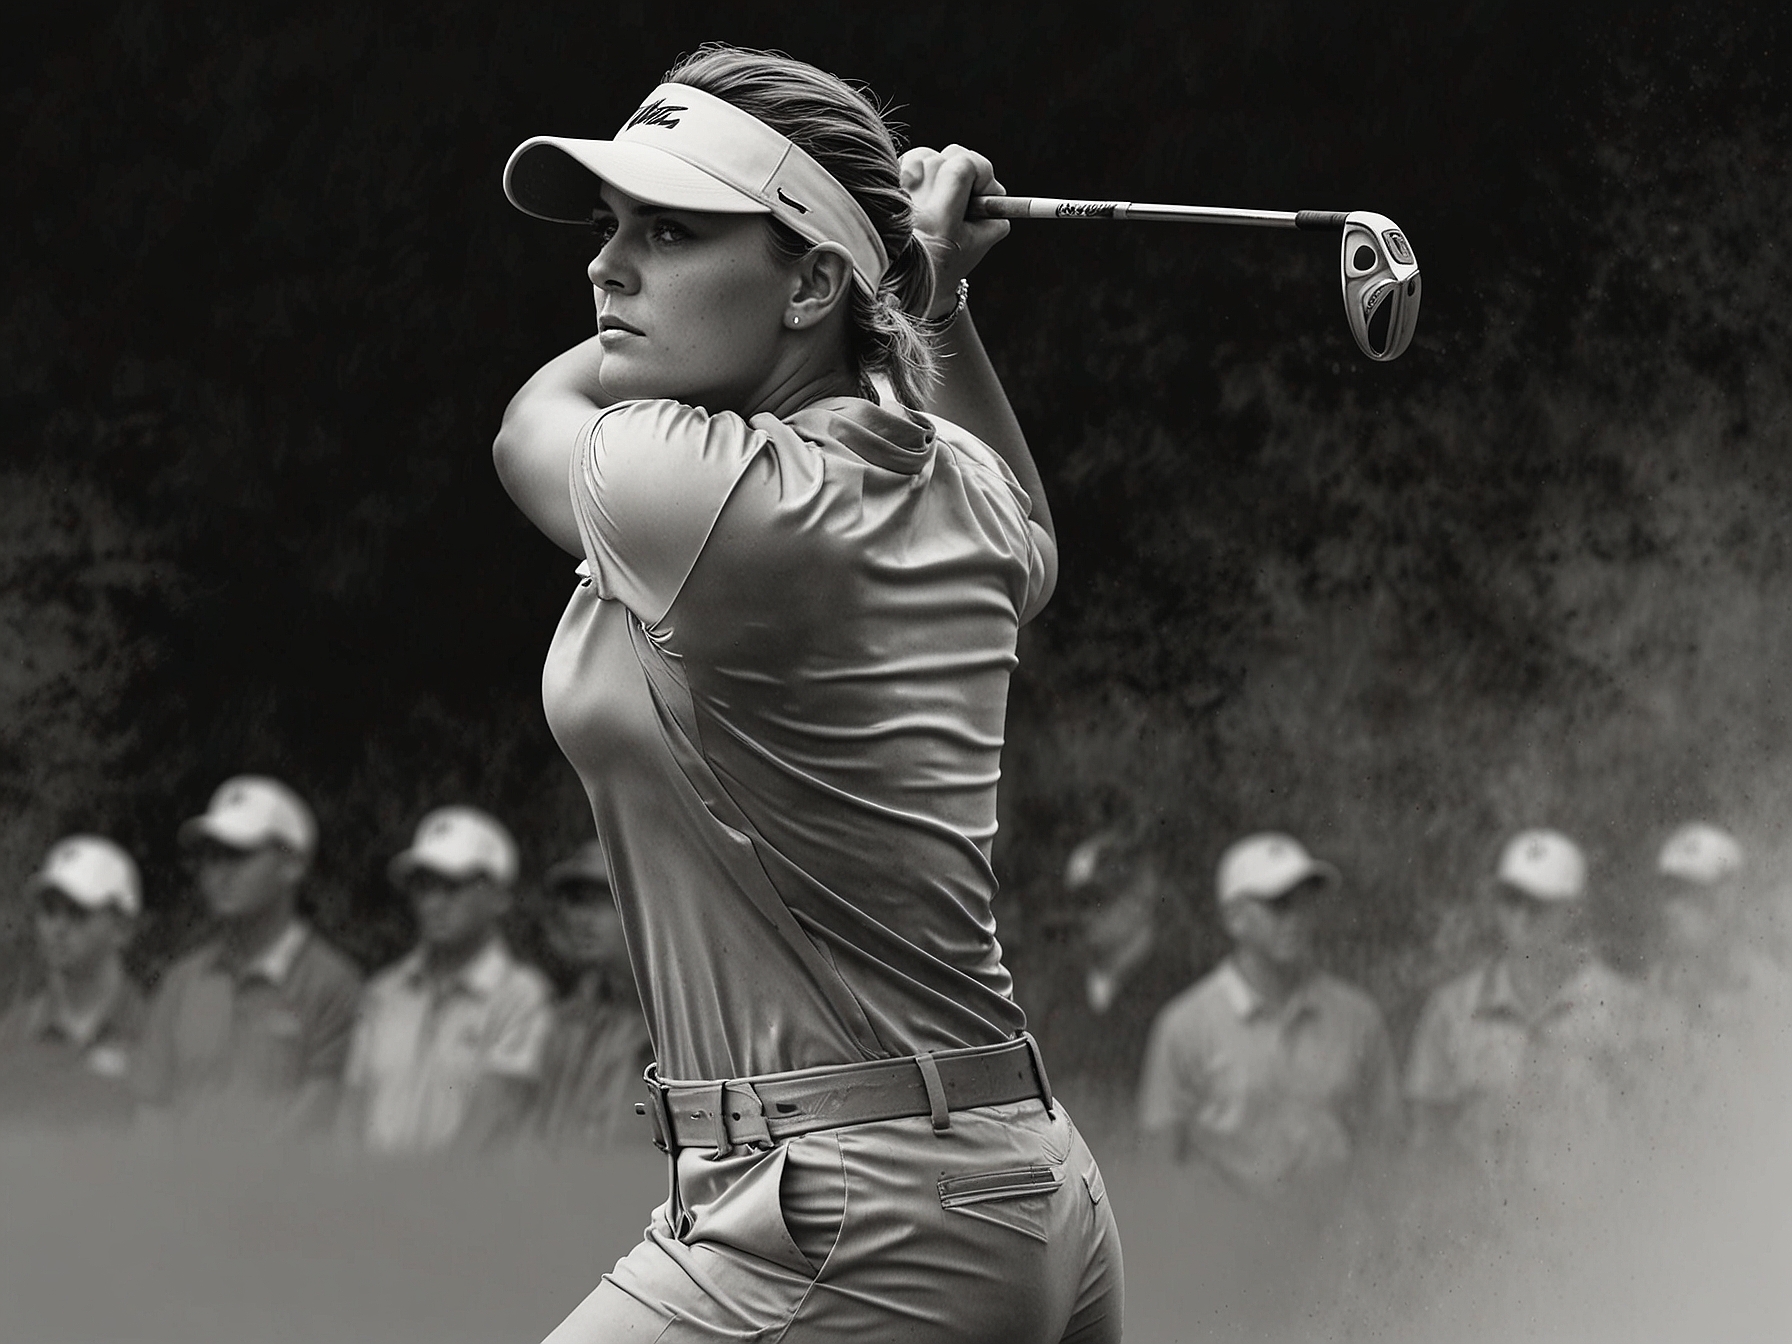 Lexi Thompson tees off at the Atlanta Athletic Club, showcasing her powerful drive and precise form during the KPMG Women's PGA Championship.